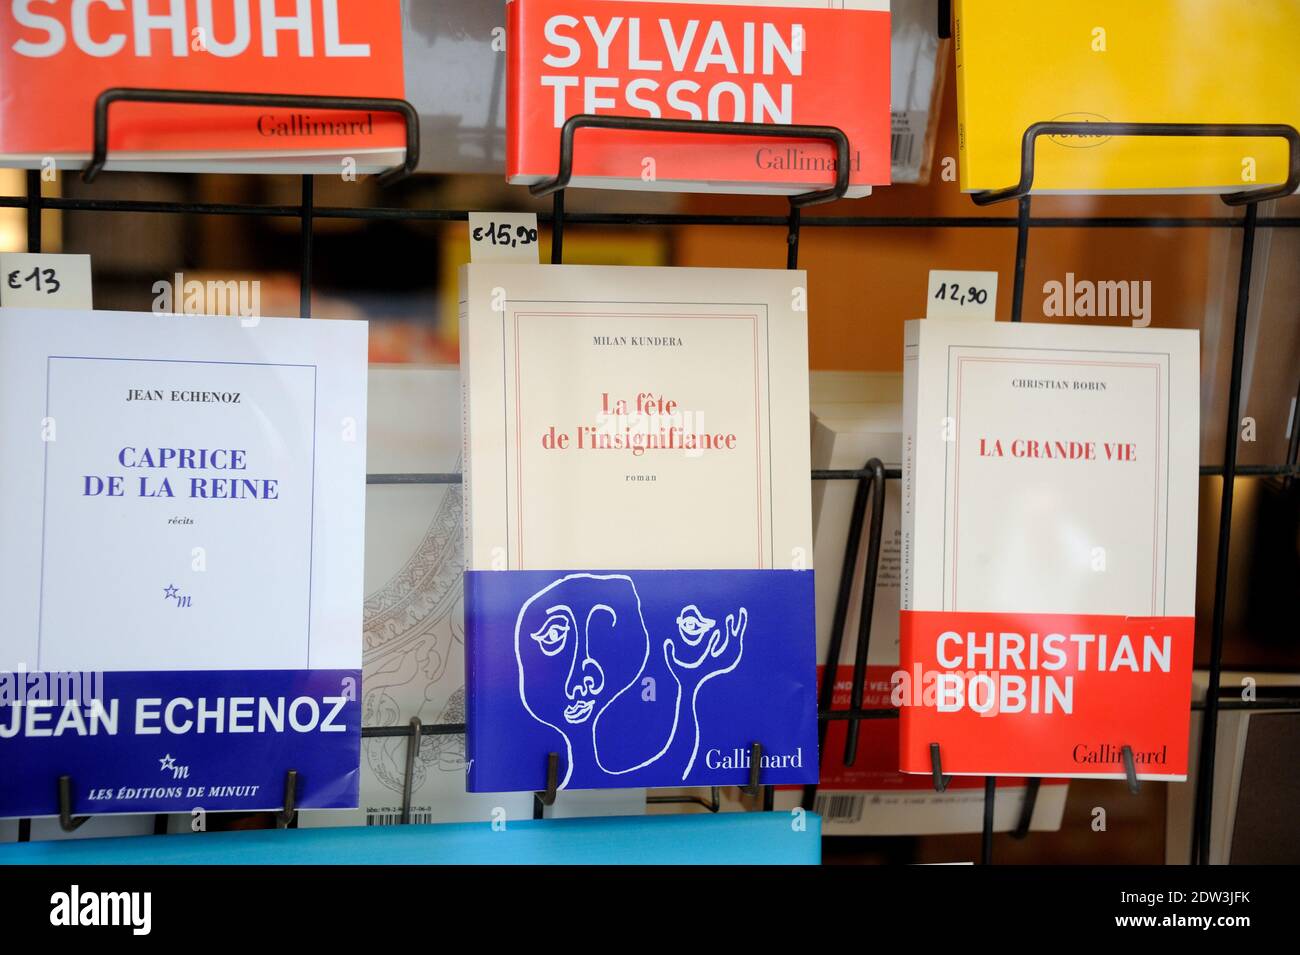 Illustration of the Milan Kundera new book 'La Fete de l'Insignifiance' in Paris, France on April 03, 2014. Photo by Alban Wyters/ABACAPRESS.COM Stock Photo